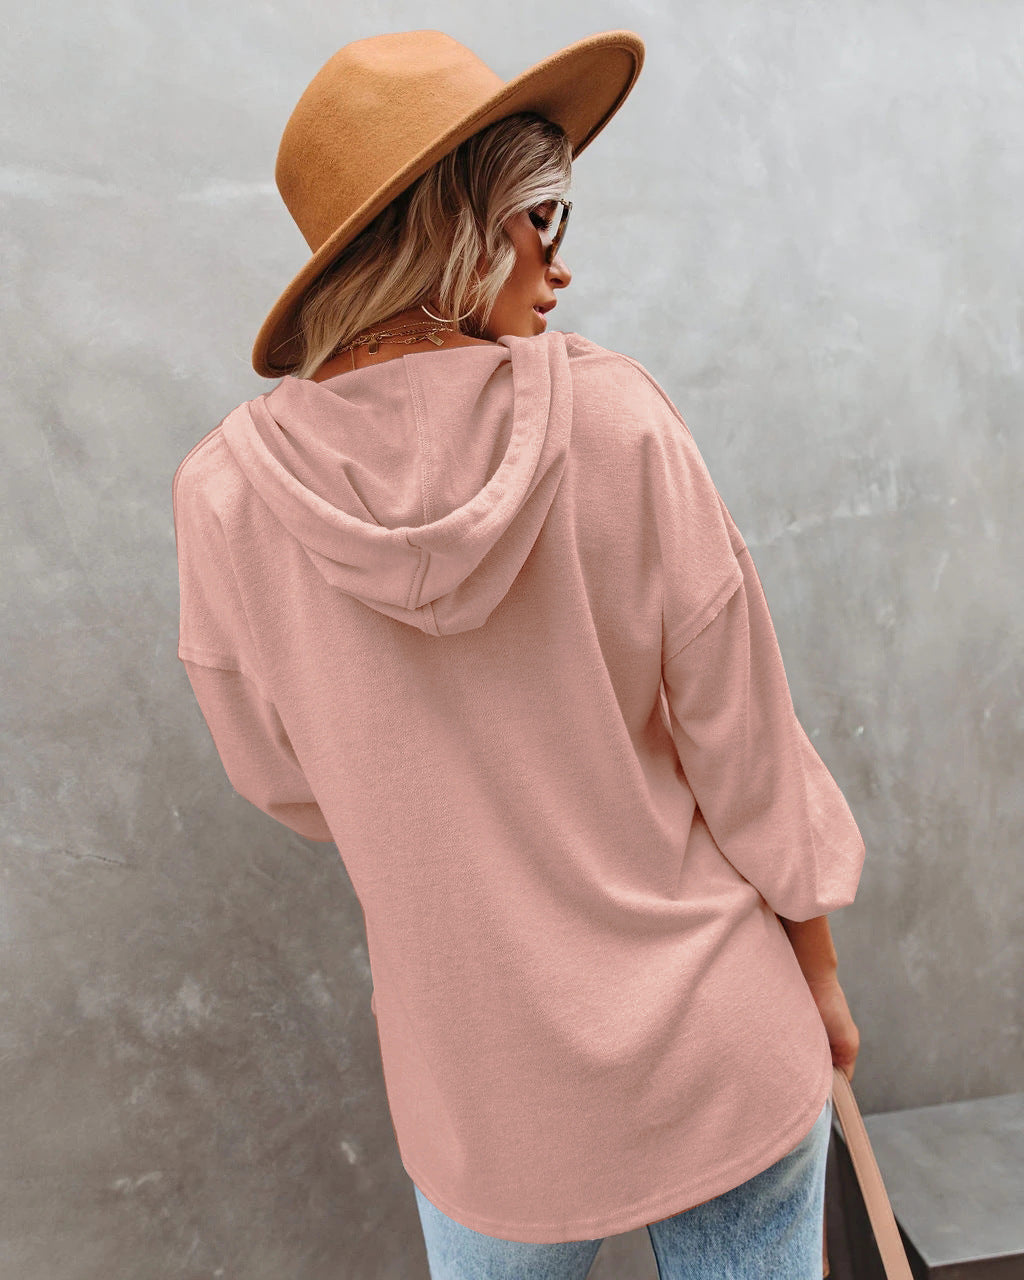 Casual Long Sleeves Hoodies Shirts for Women